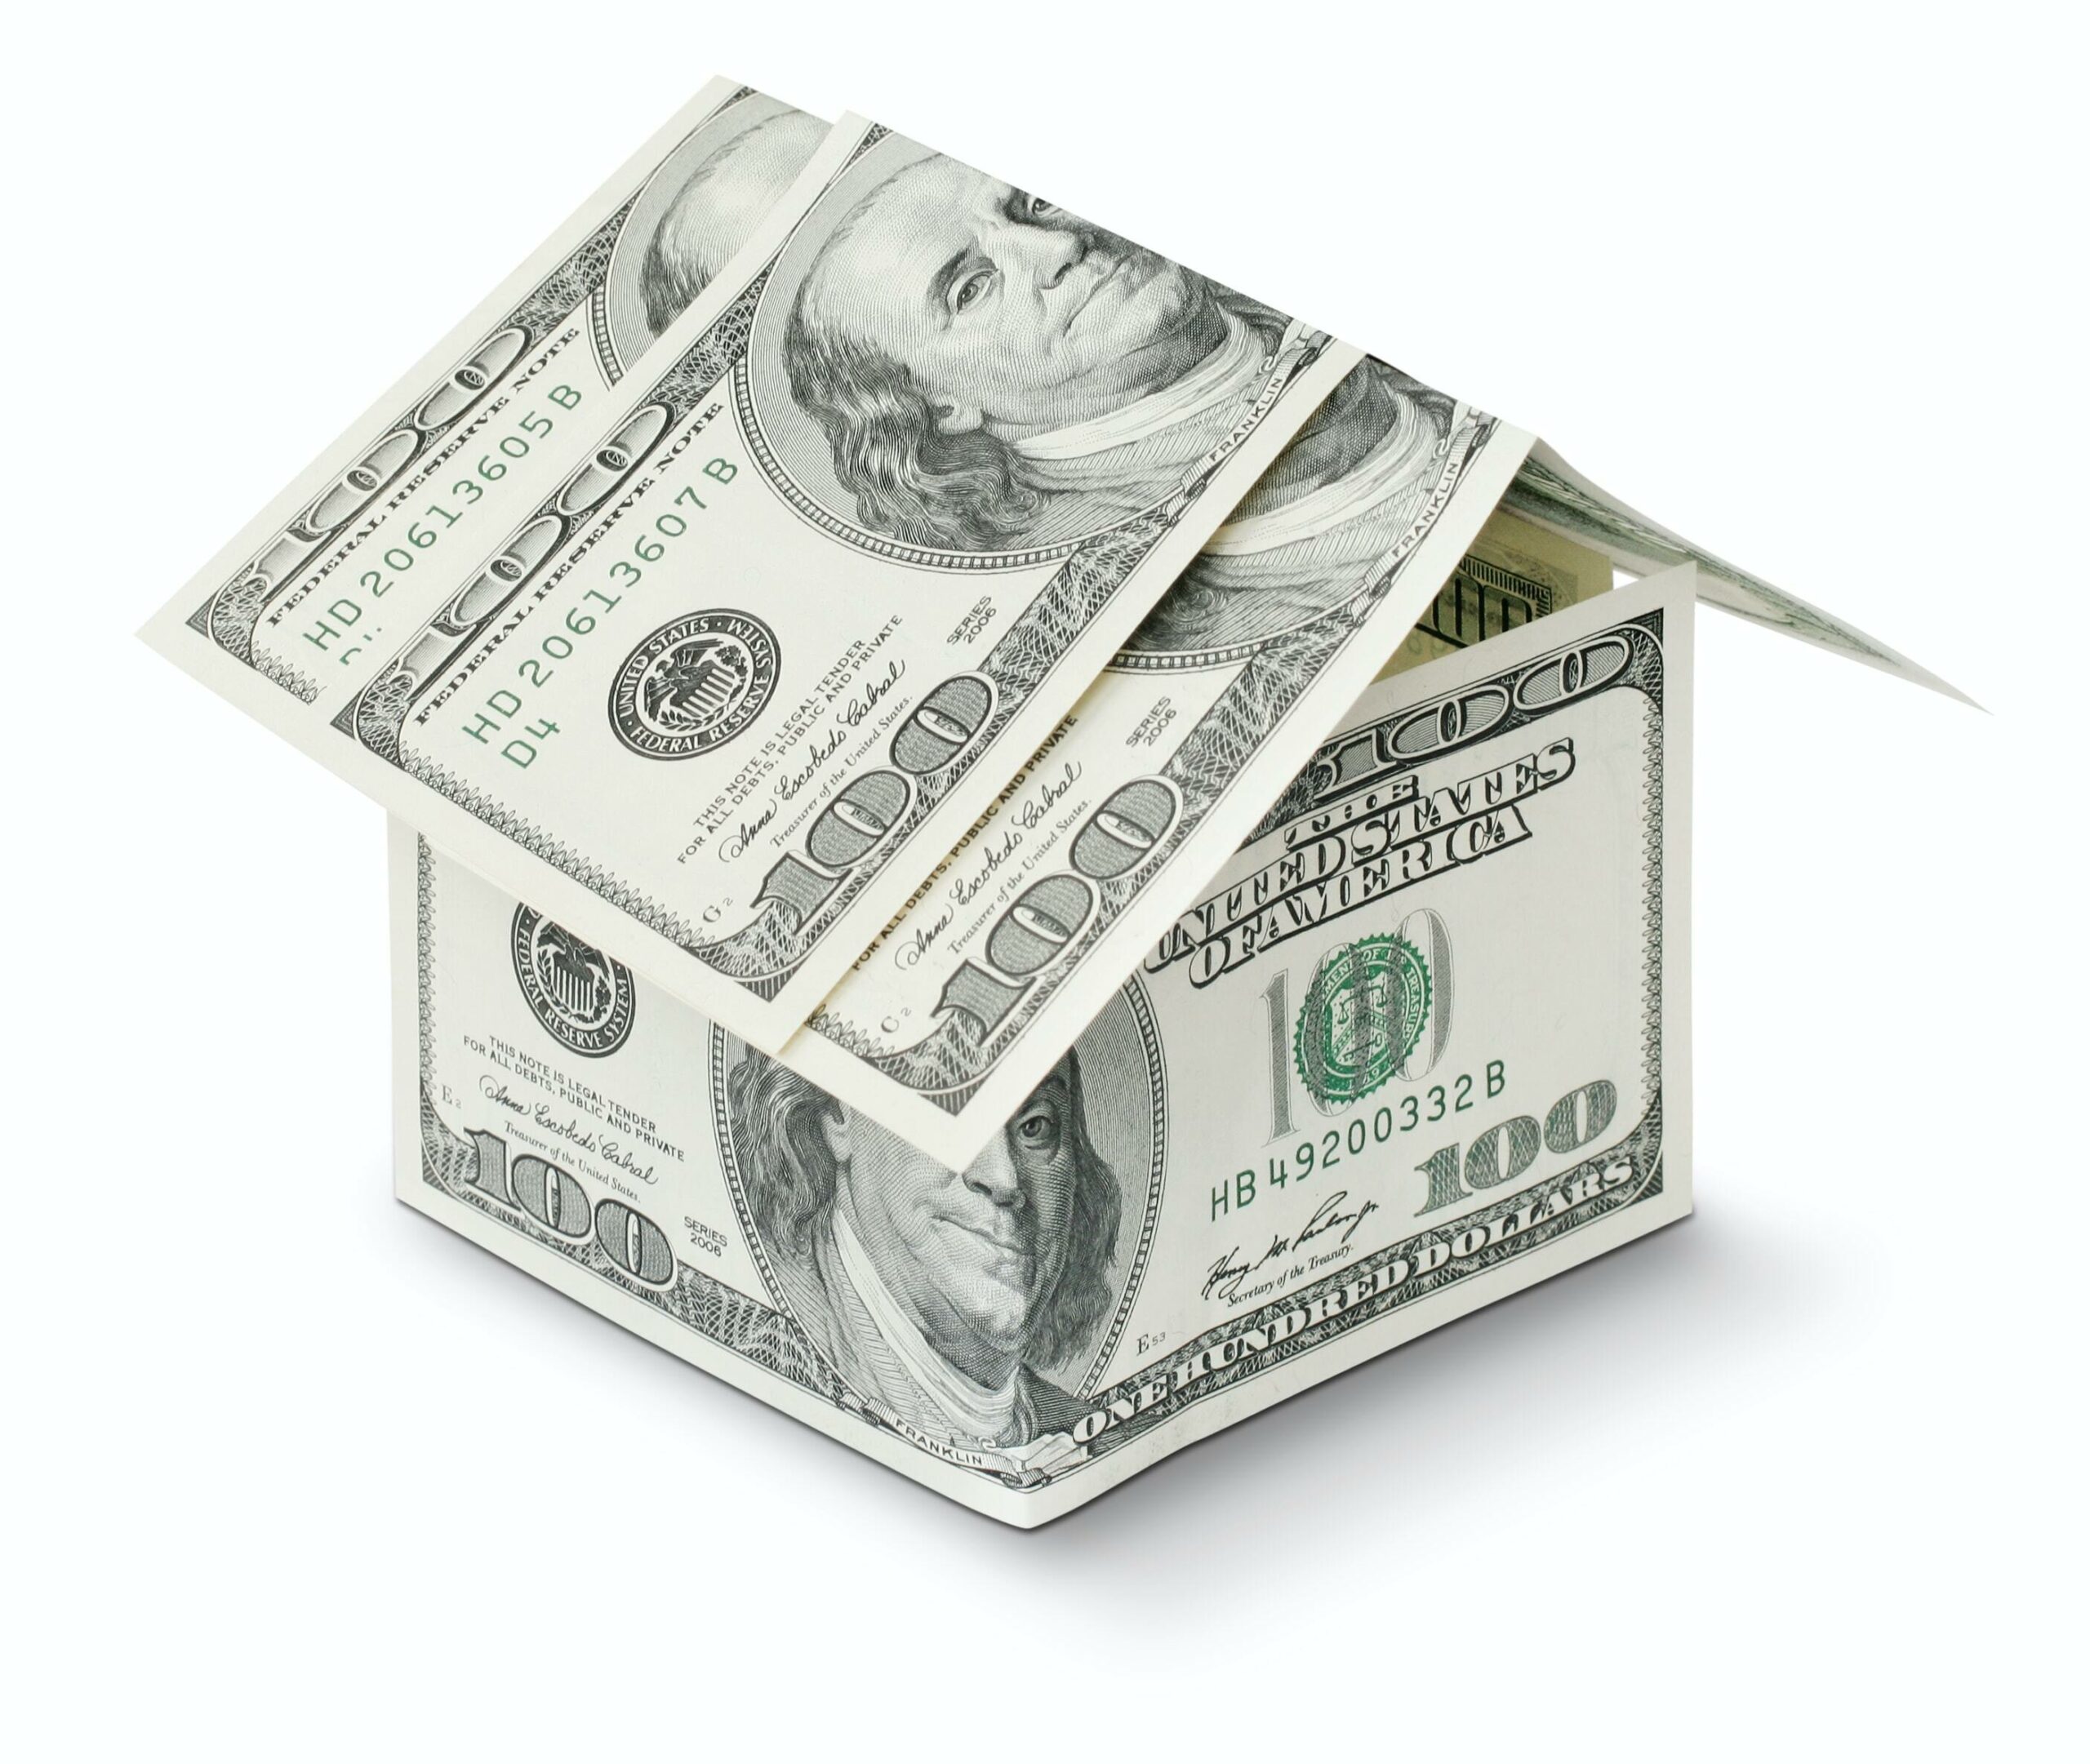 stock image of hundred dollar bills constructed like a house